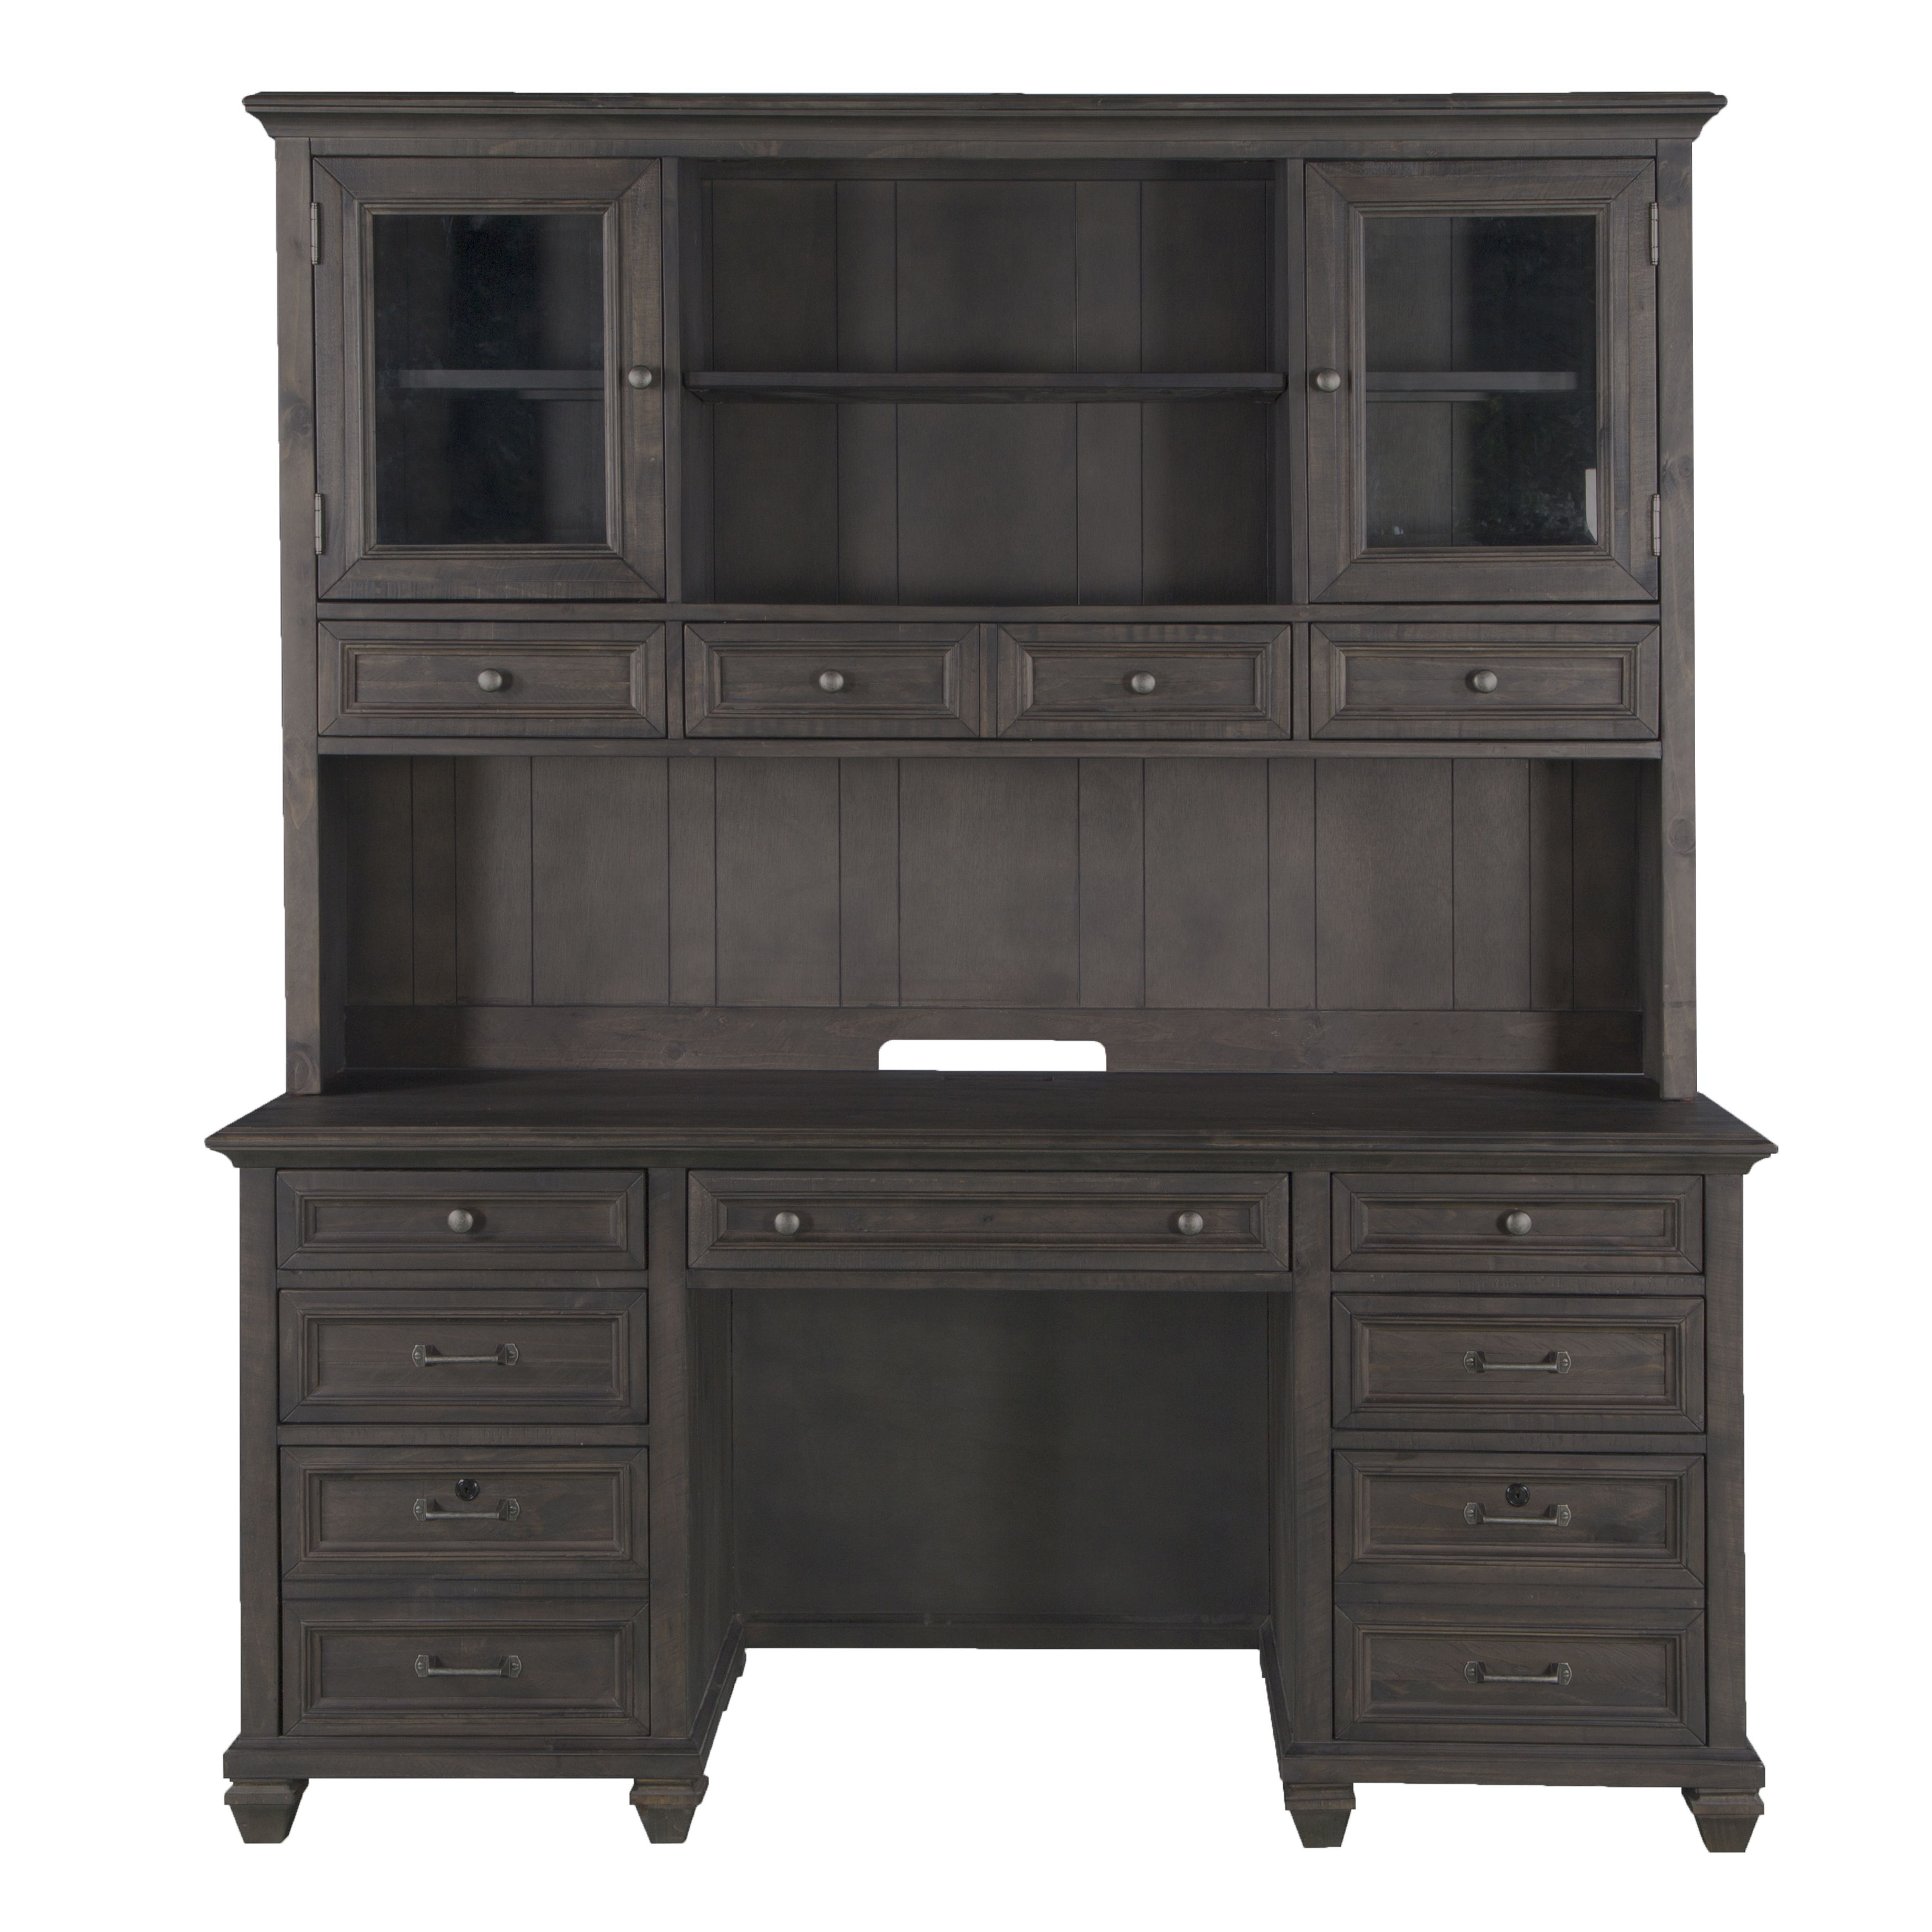 Sutton Place - Hutch - Weathered Charcoal